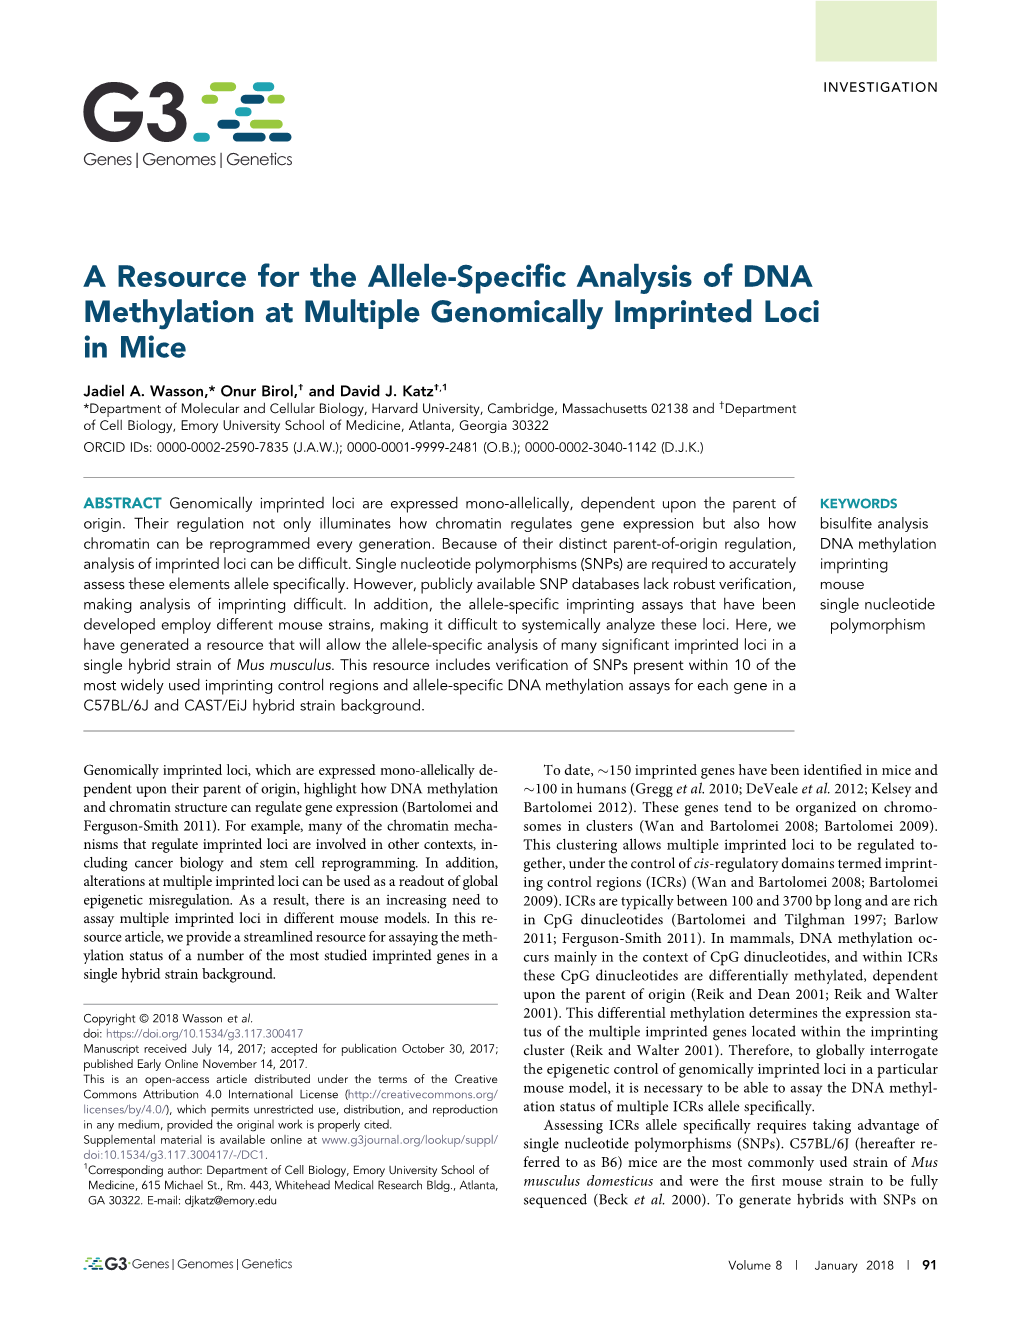 A Resource for the Allele-Specific Analysis of DNA Methylation At